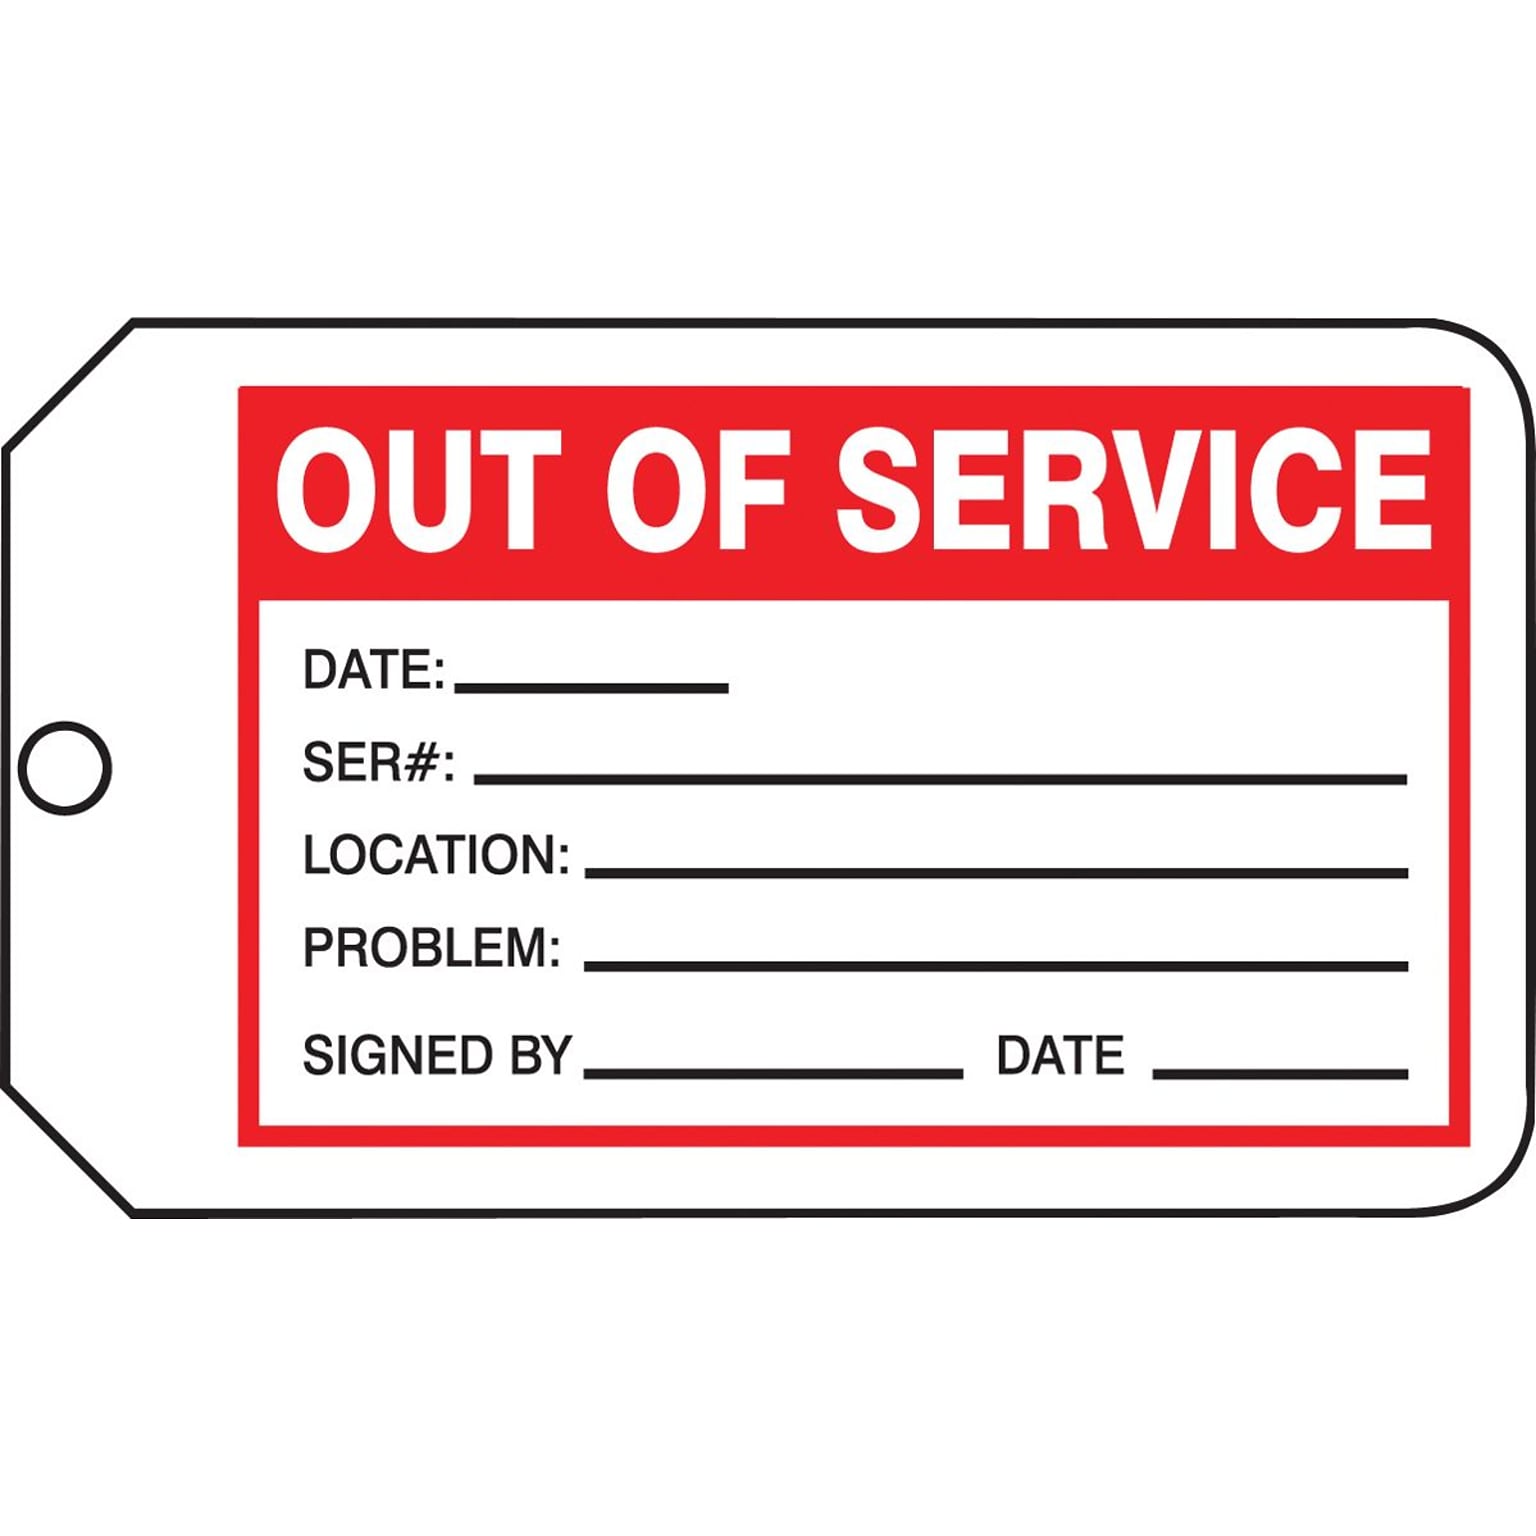 Accuform Production Control Tag, OUT OF SERVICE, 5 3/4 x 3 1/4, PF-Cardstock, 25/Pack (MMT330CTP)